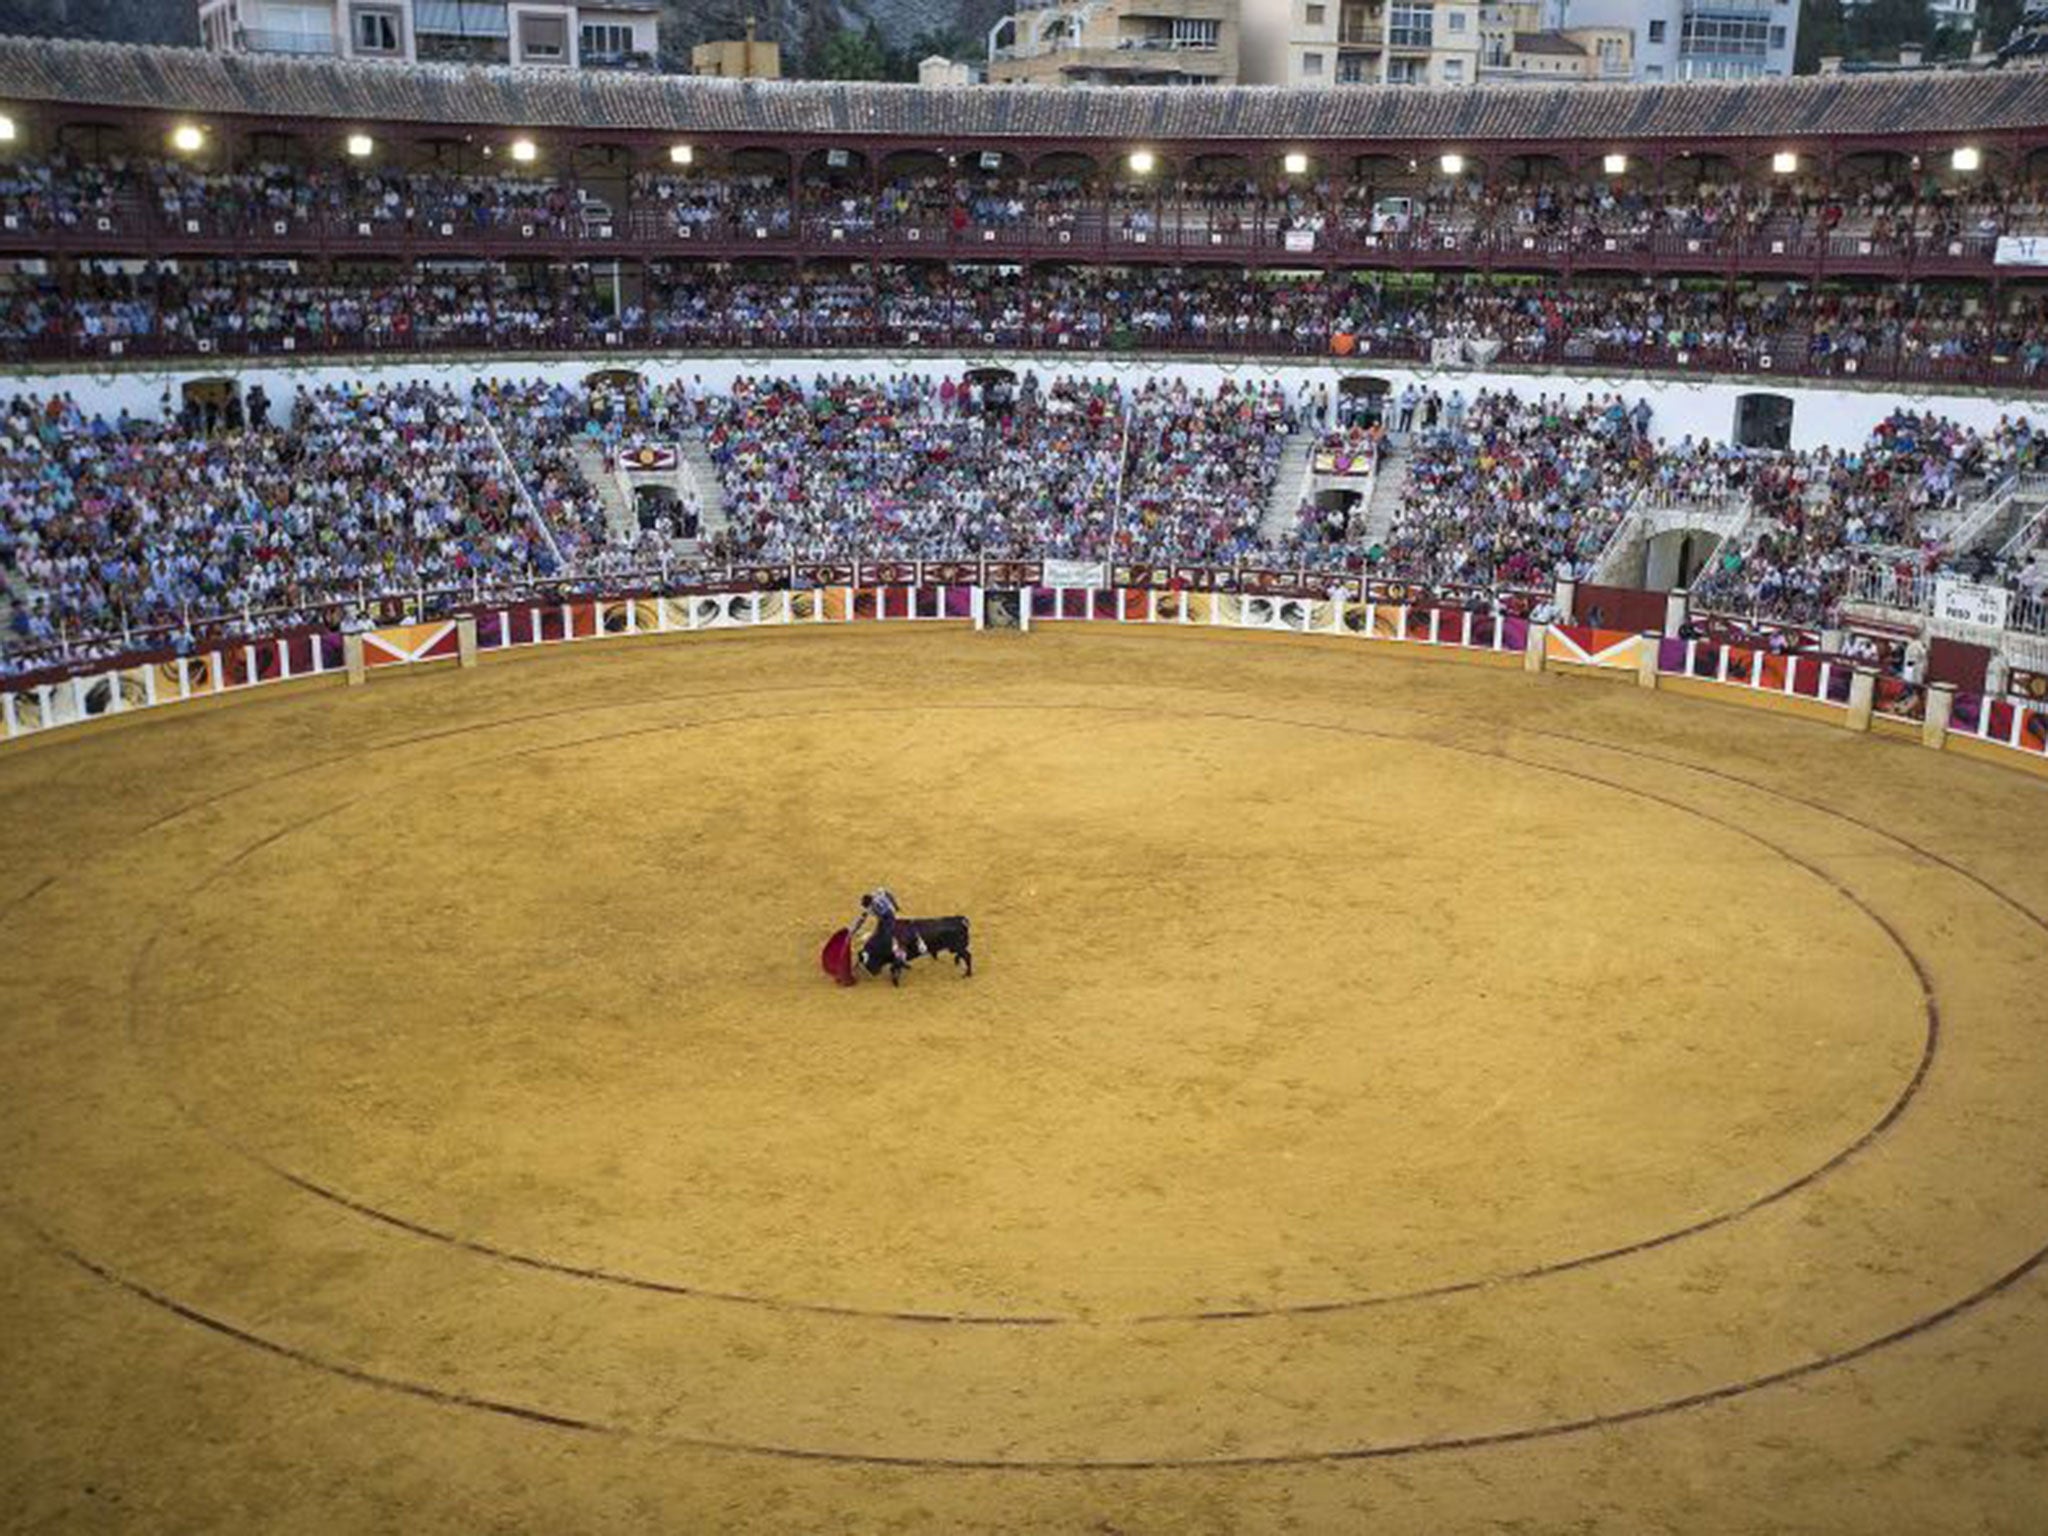 Adrián Hinojosa performed a lap of honour with matadors in Valencia after a fight